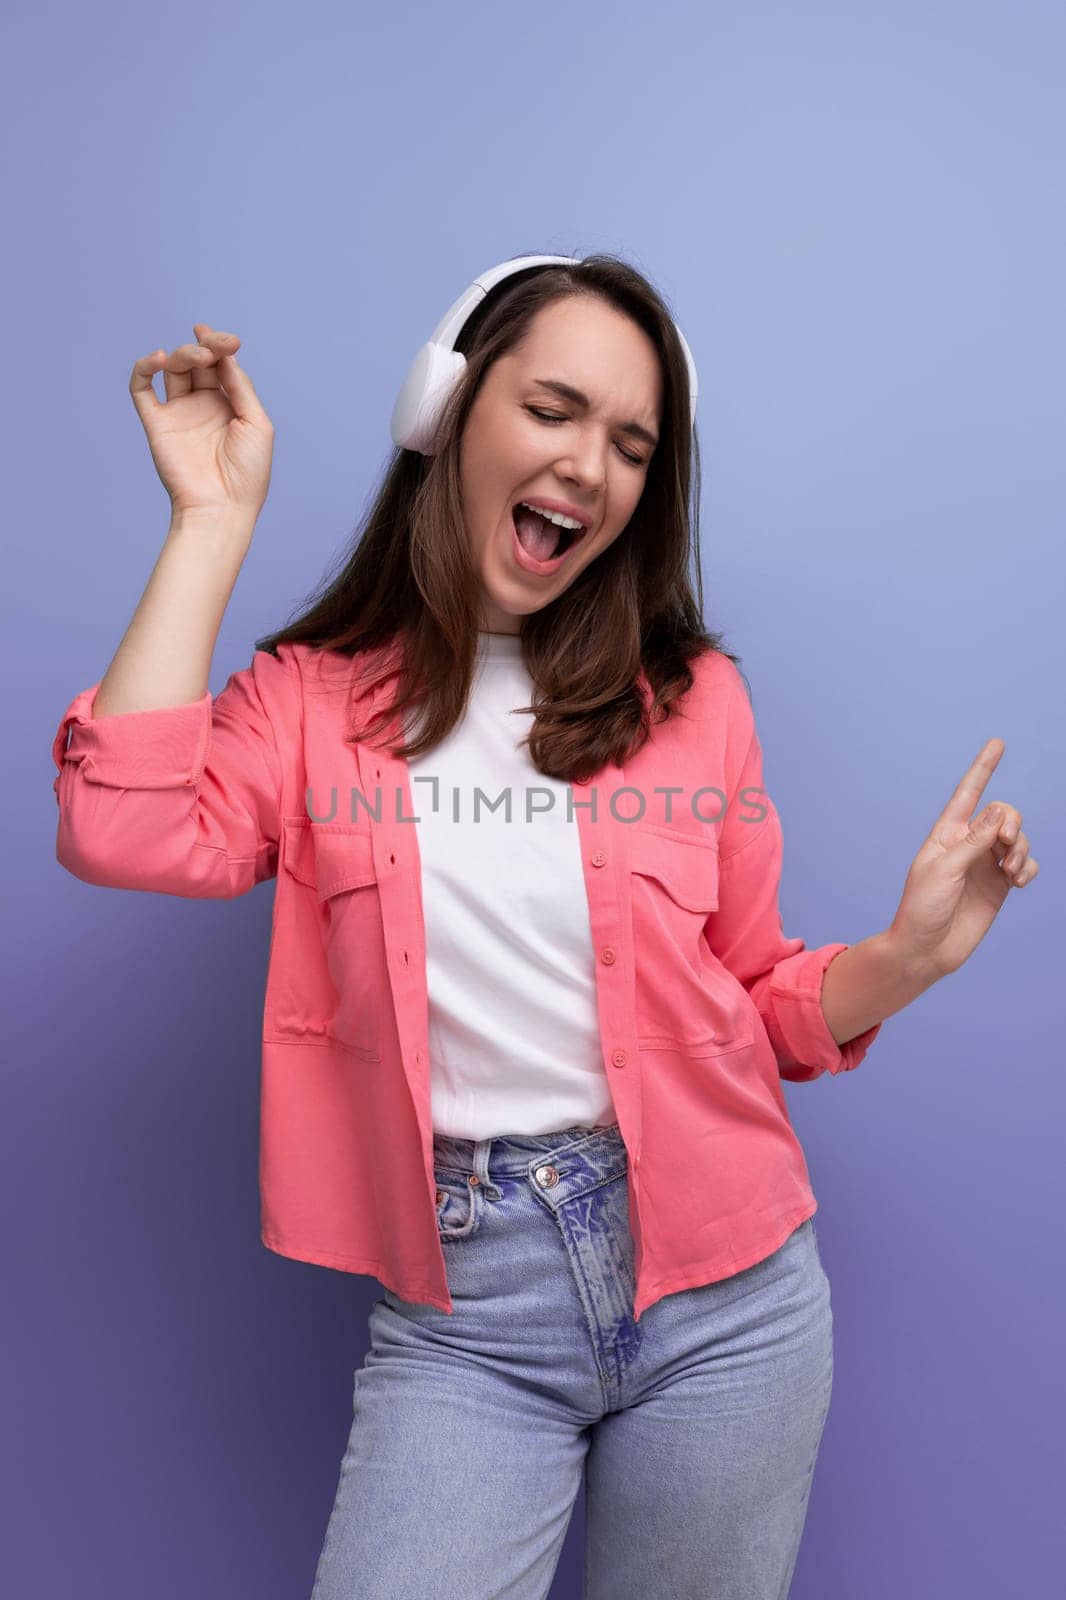 enjoying brunette young woman with dark hair below her shoulders in a shirt and jeans with wireless headphones.